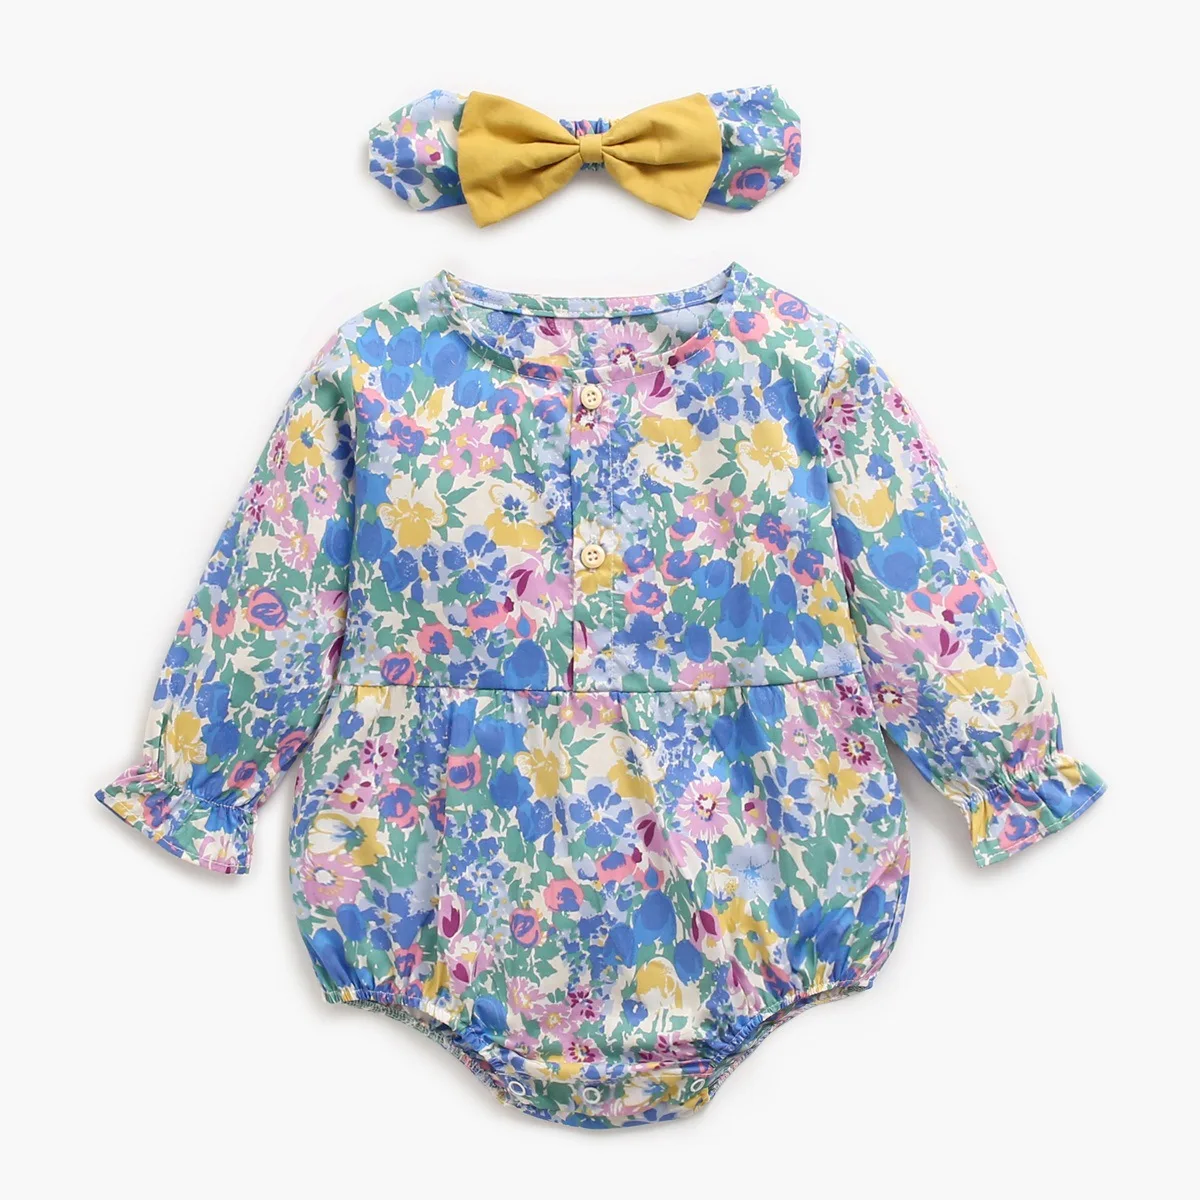 

Autumn Infant Girl Suit Clothing Long Sleeve Floral Print Toddler Girls Bodysuit + Hairband Twins Baby Clothes For 0-2y Baby